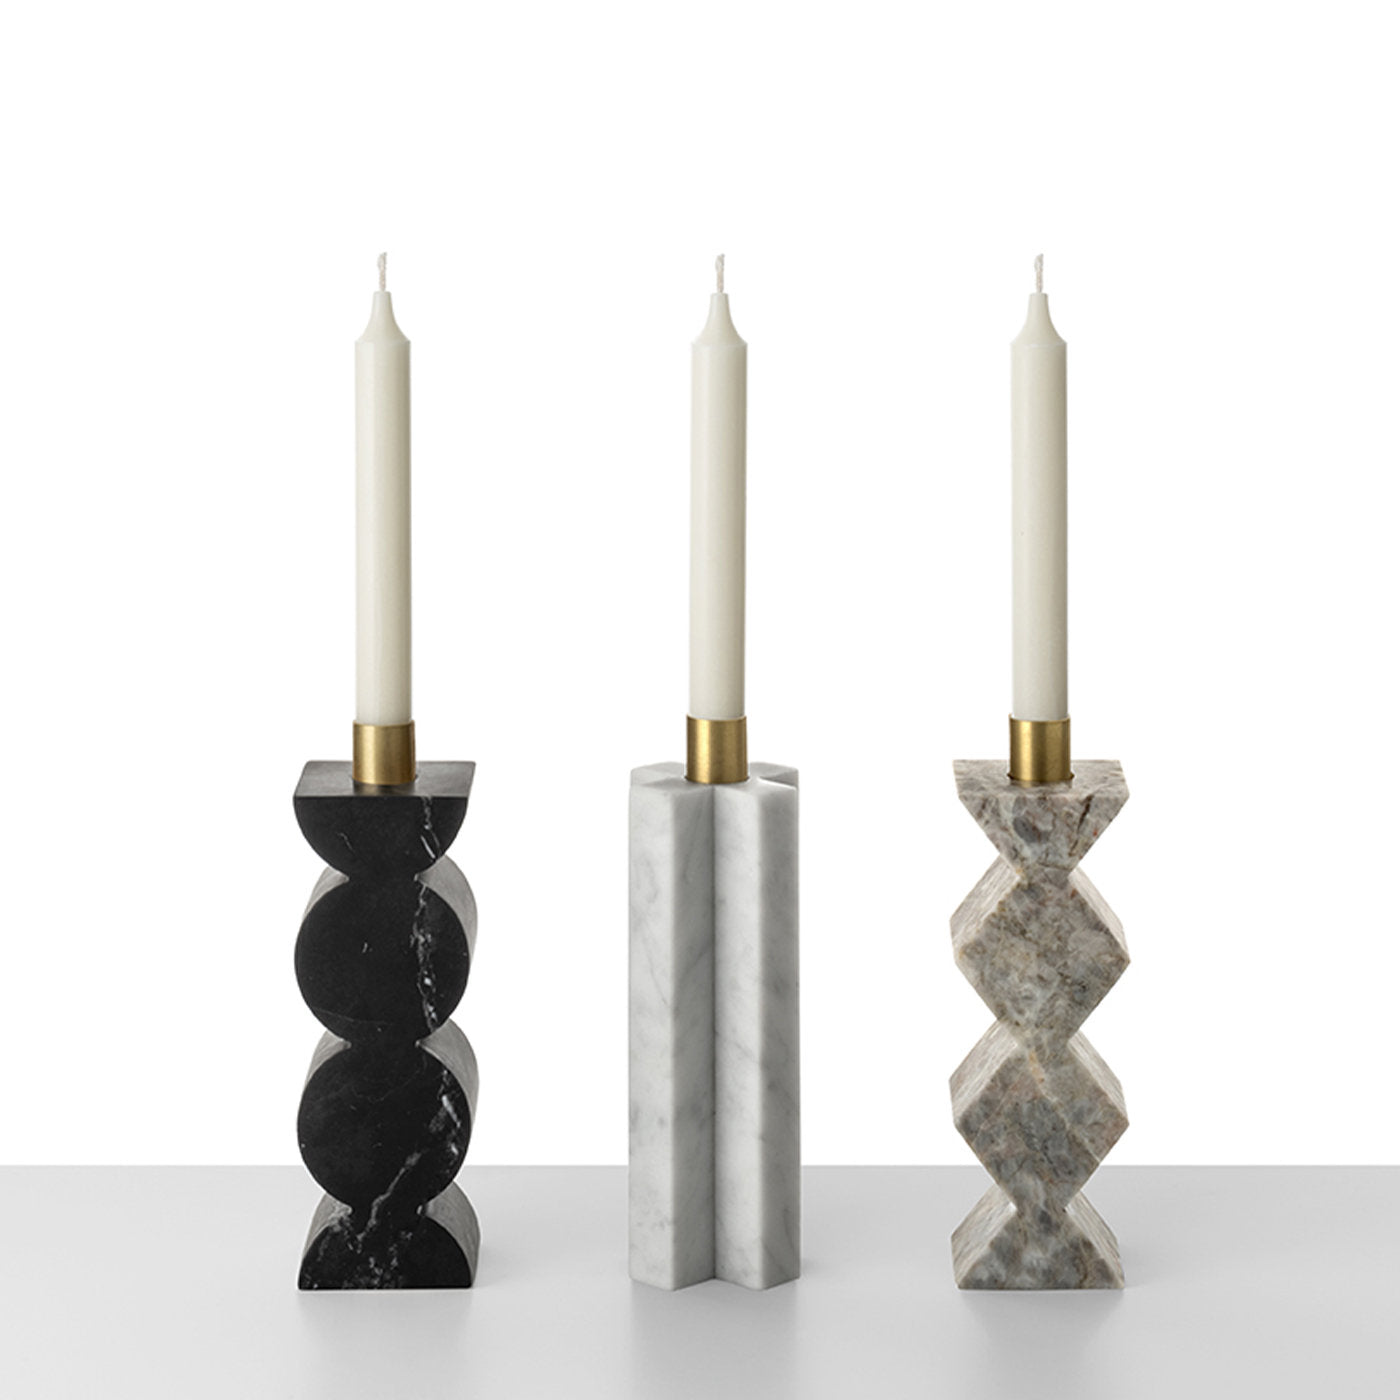 Constantin Black Marble Candle Holder by Agustina Bottoni - Alternative view 1